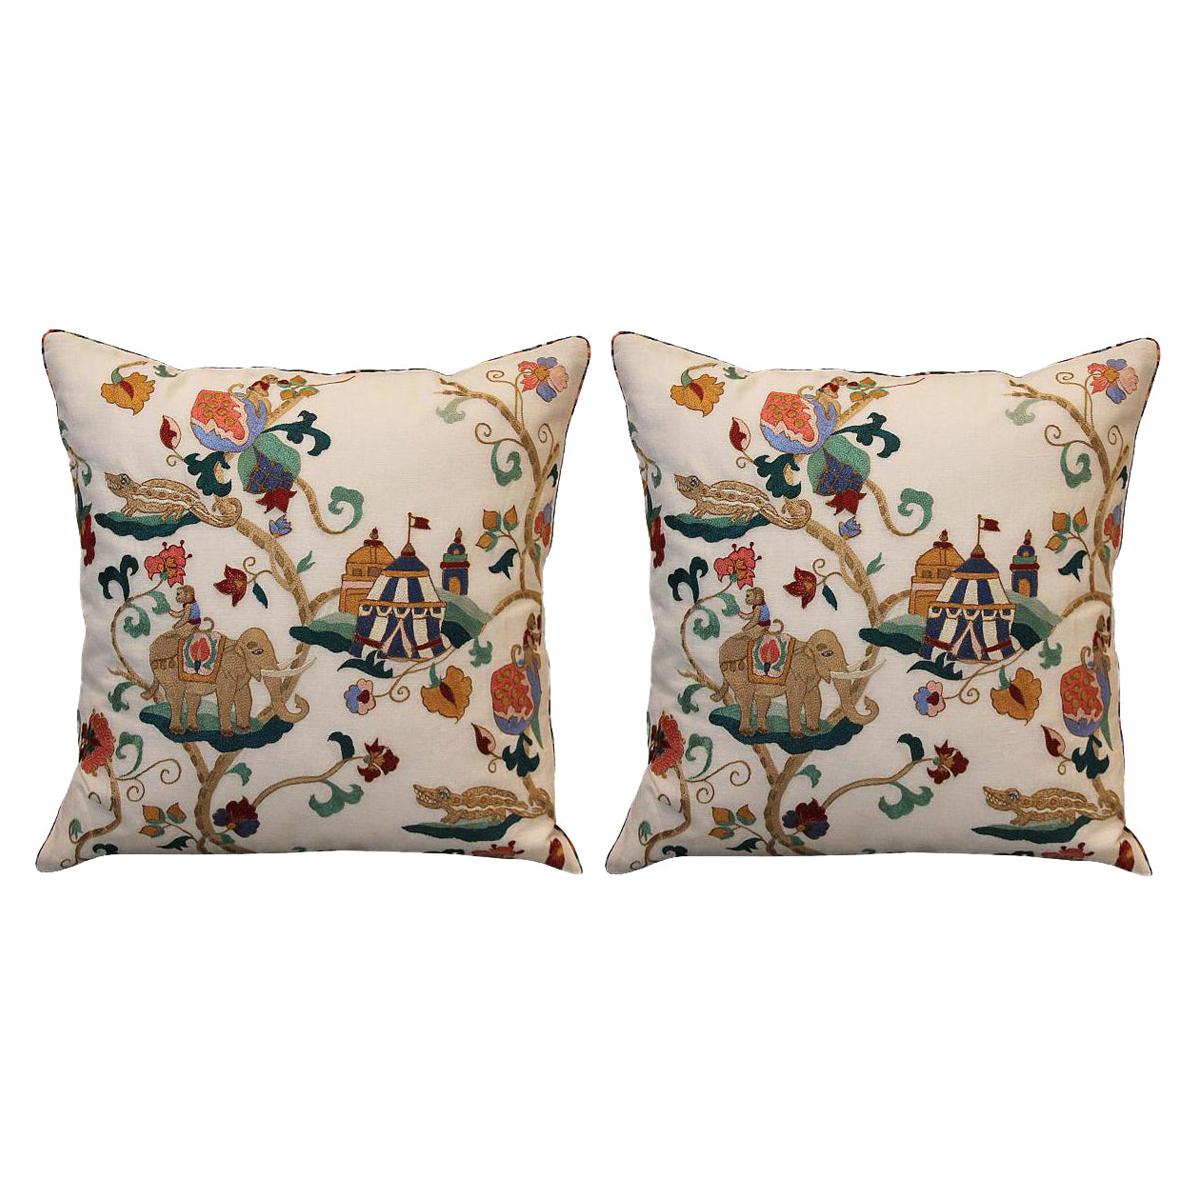 Pair of Embroidered Cotton Pillows with Circus Theme & Multicolour Back